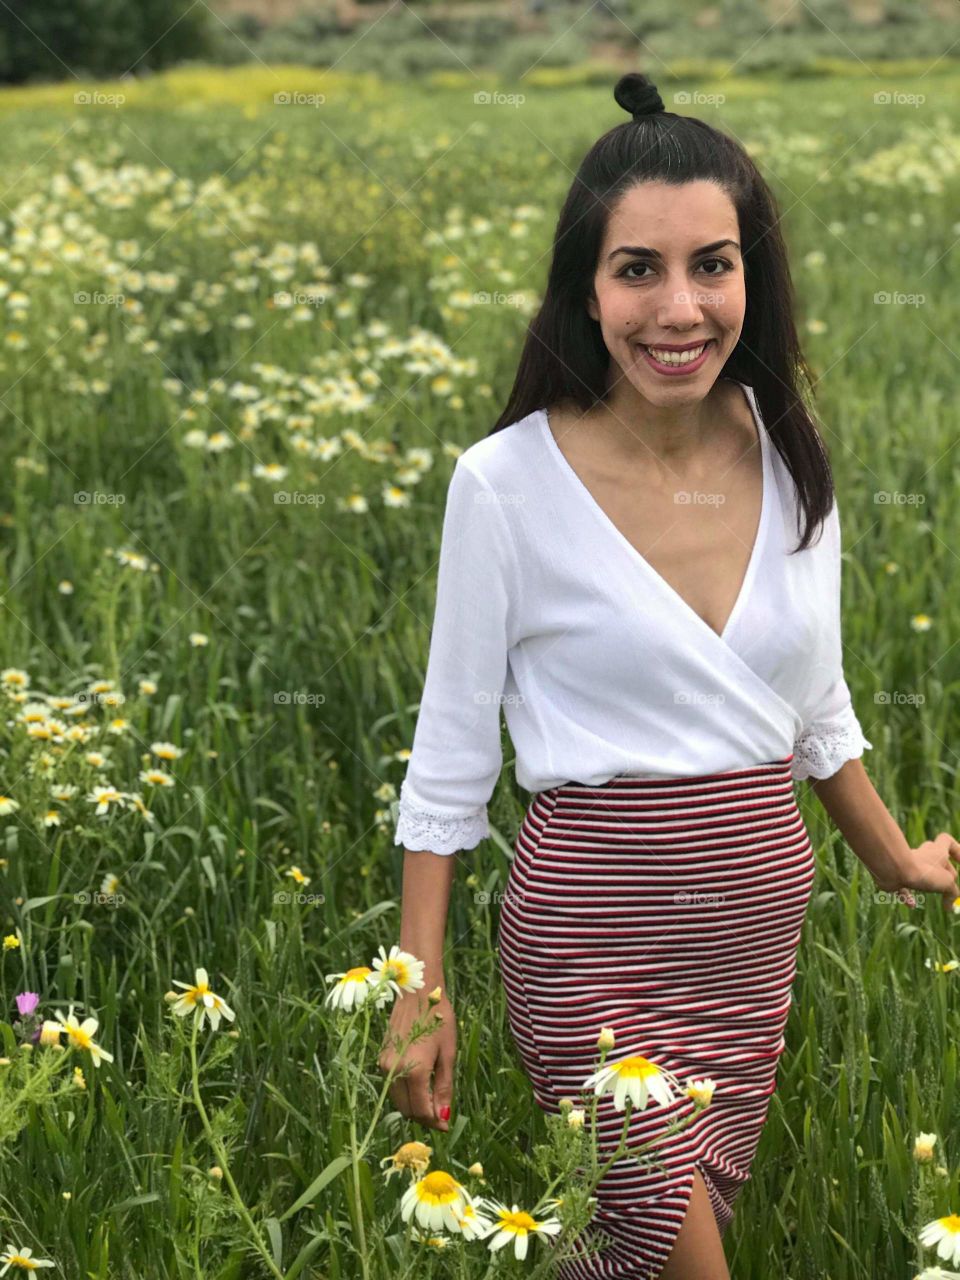 girl, woman, nature, flowers, day, smile, moda